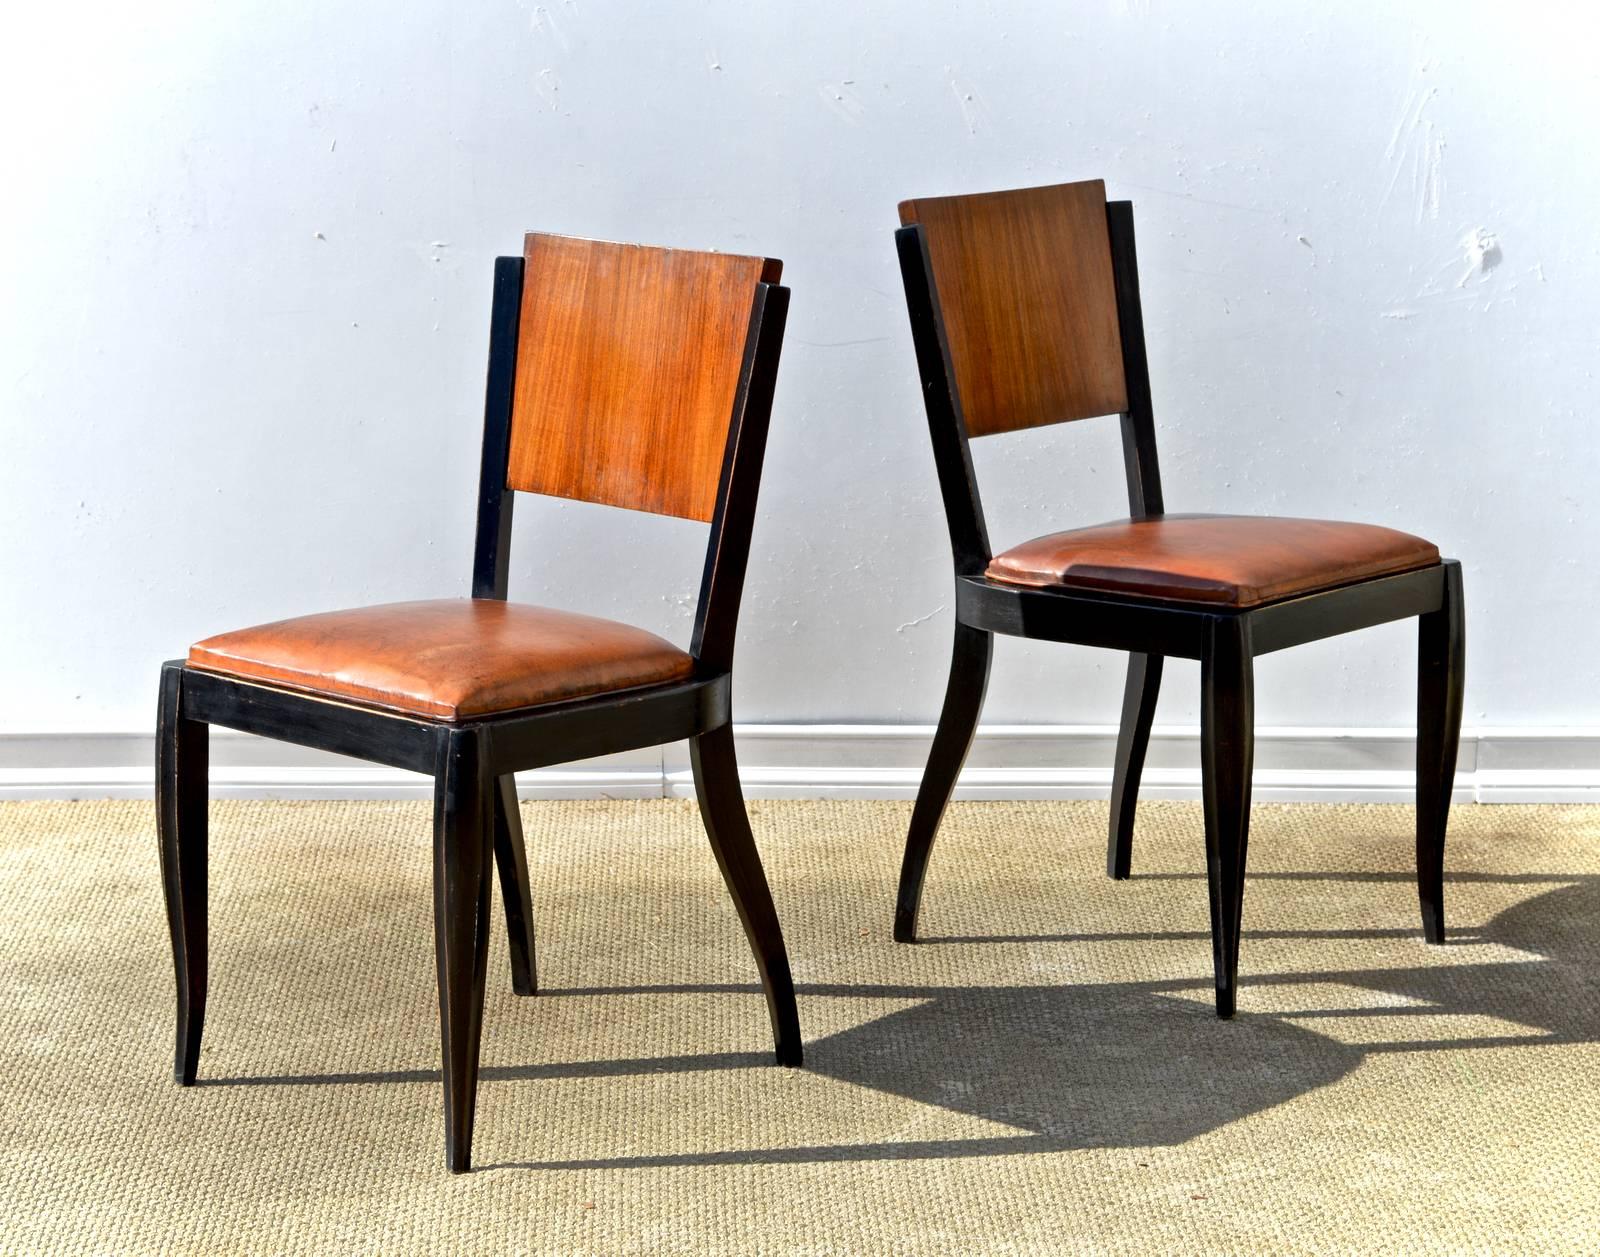 Pair of ebonized French side chairs in the Art Deco taste. Curvy legs and supple brown leather on the seats. Tre' chic.
 